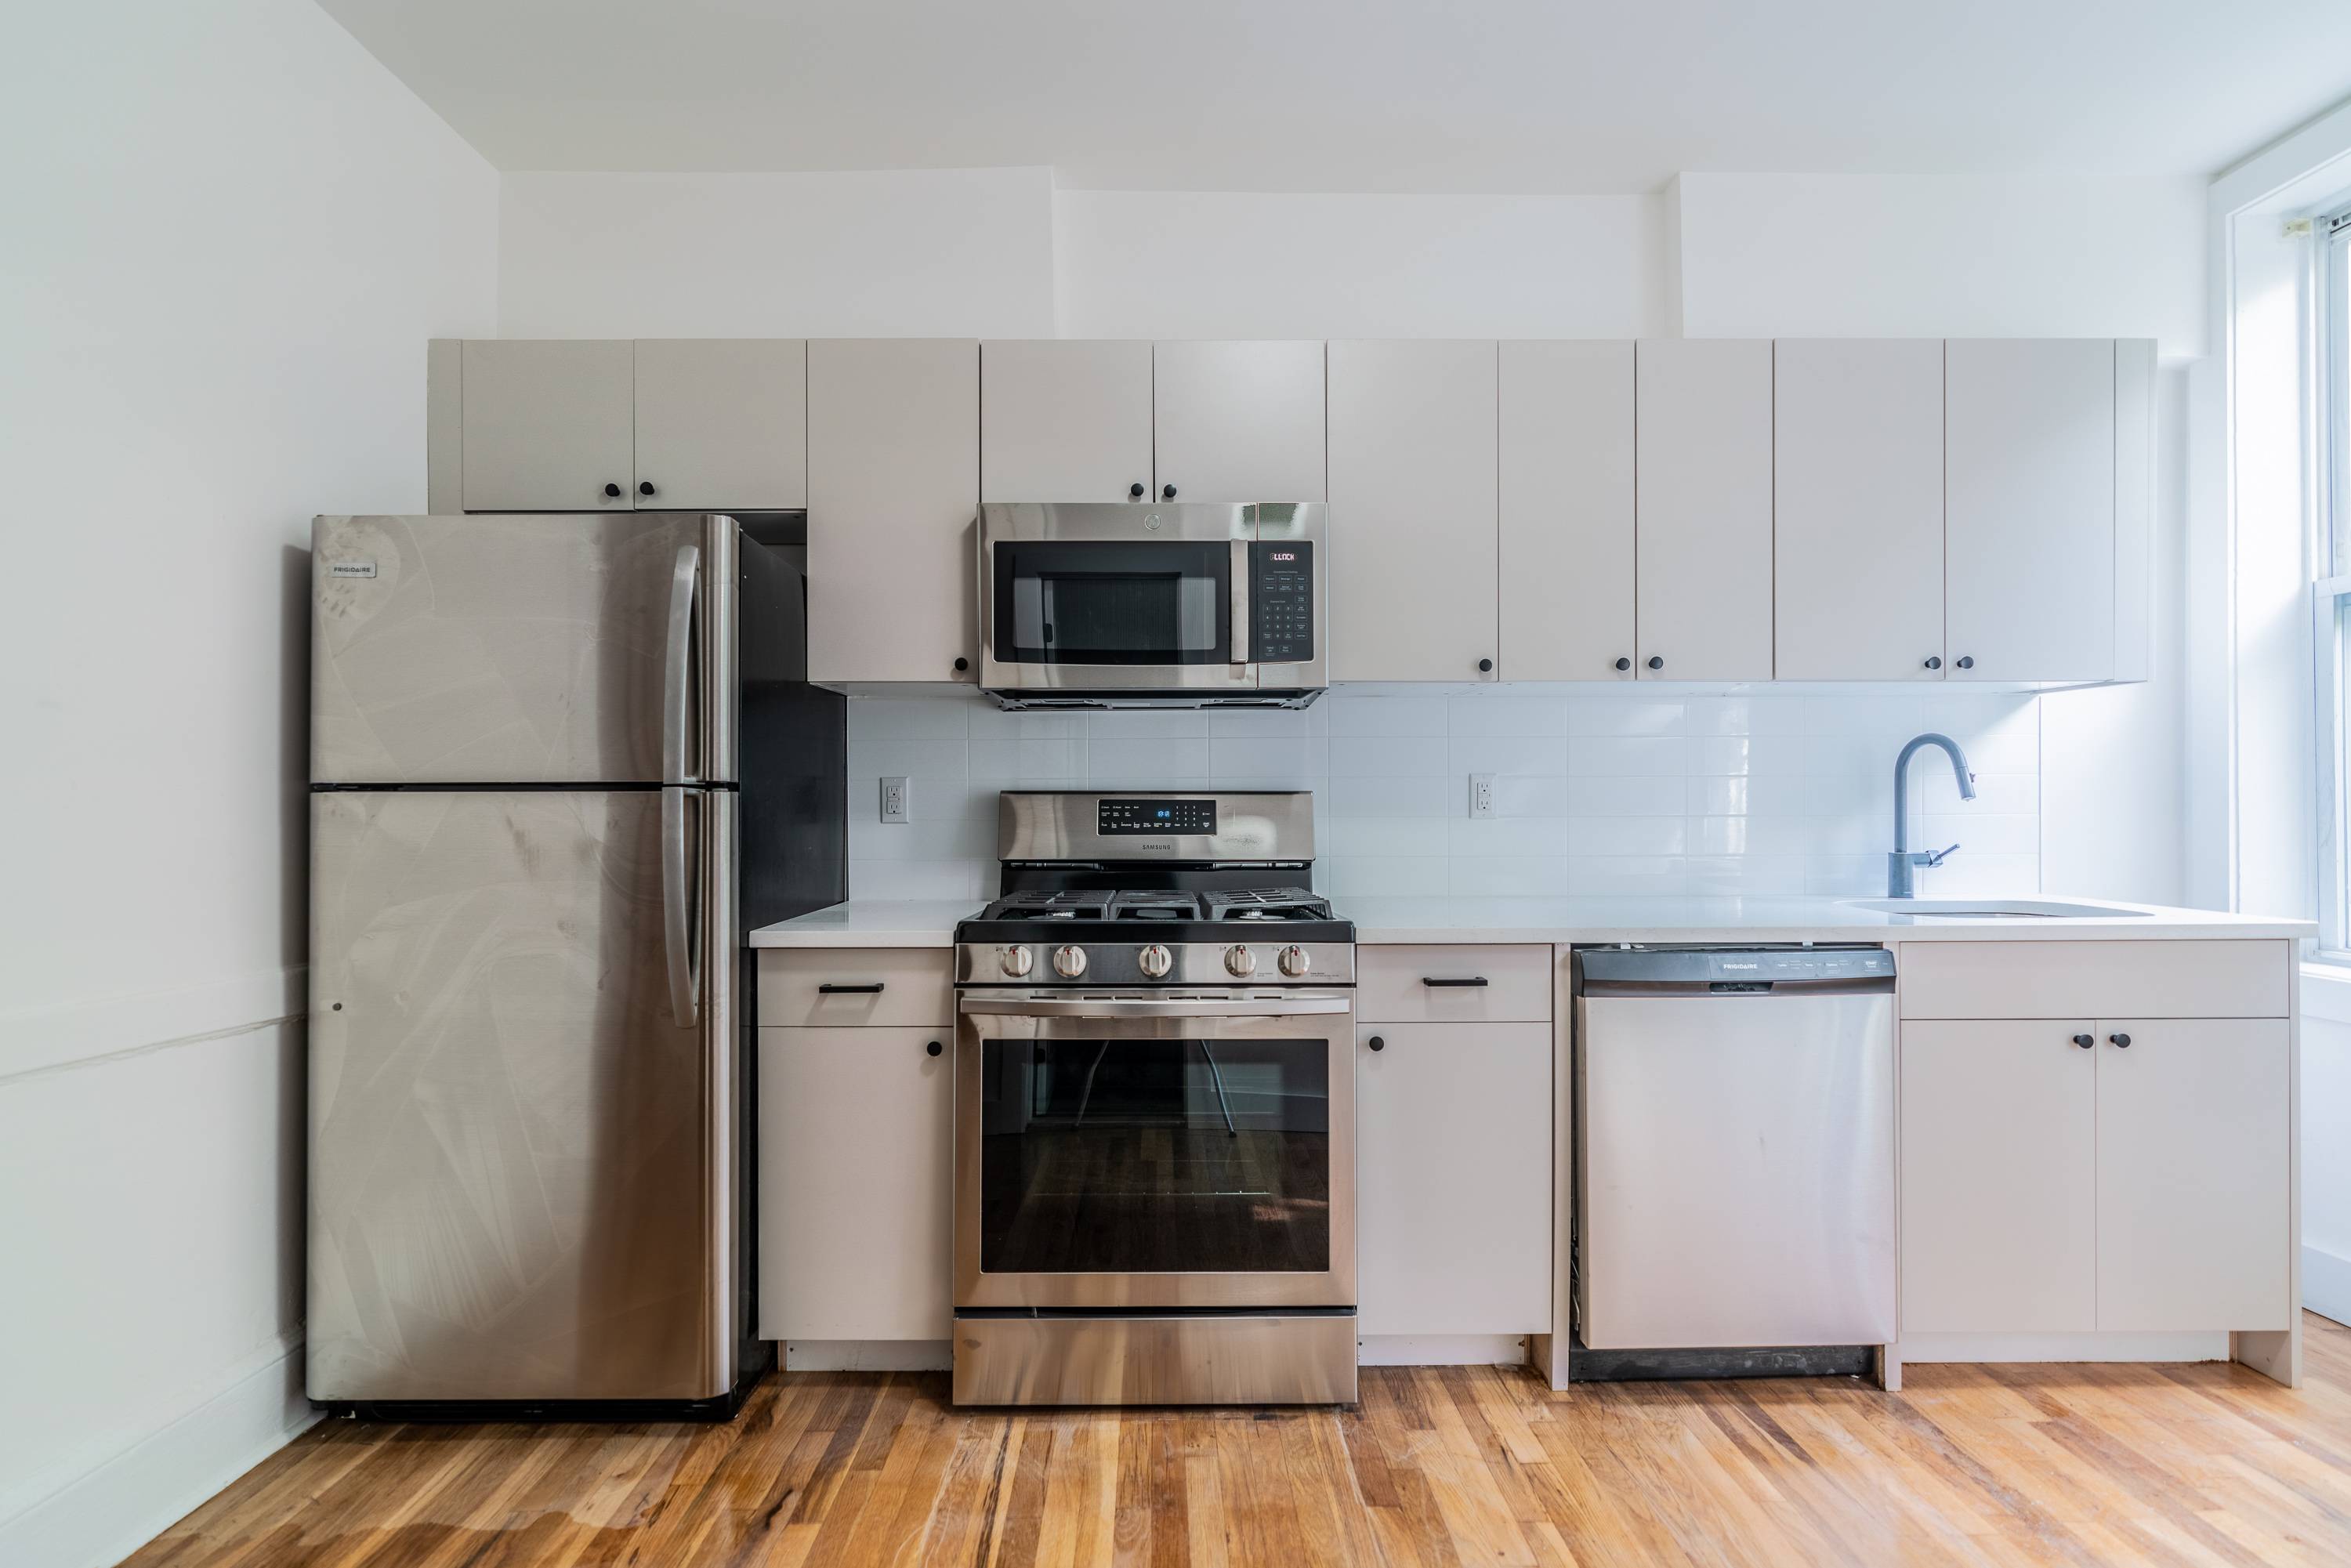 Stunning 1 Bedroom Renovated Apartment in Downtown Hoboken, NJ .  Laundry on site, Storage Available! All New Stainless Steel Appliances!  1 Month Security and No Broker Fees!